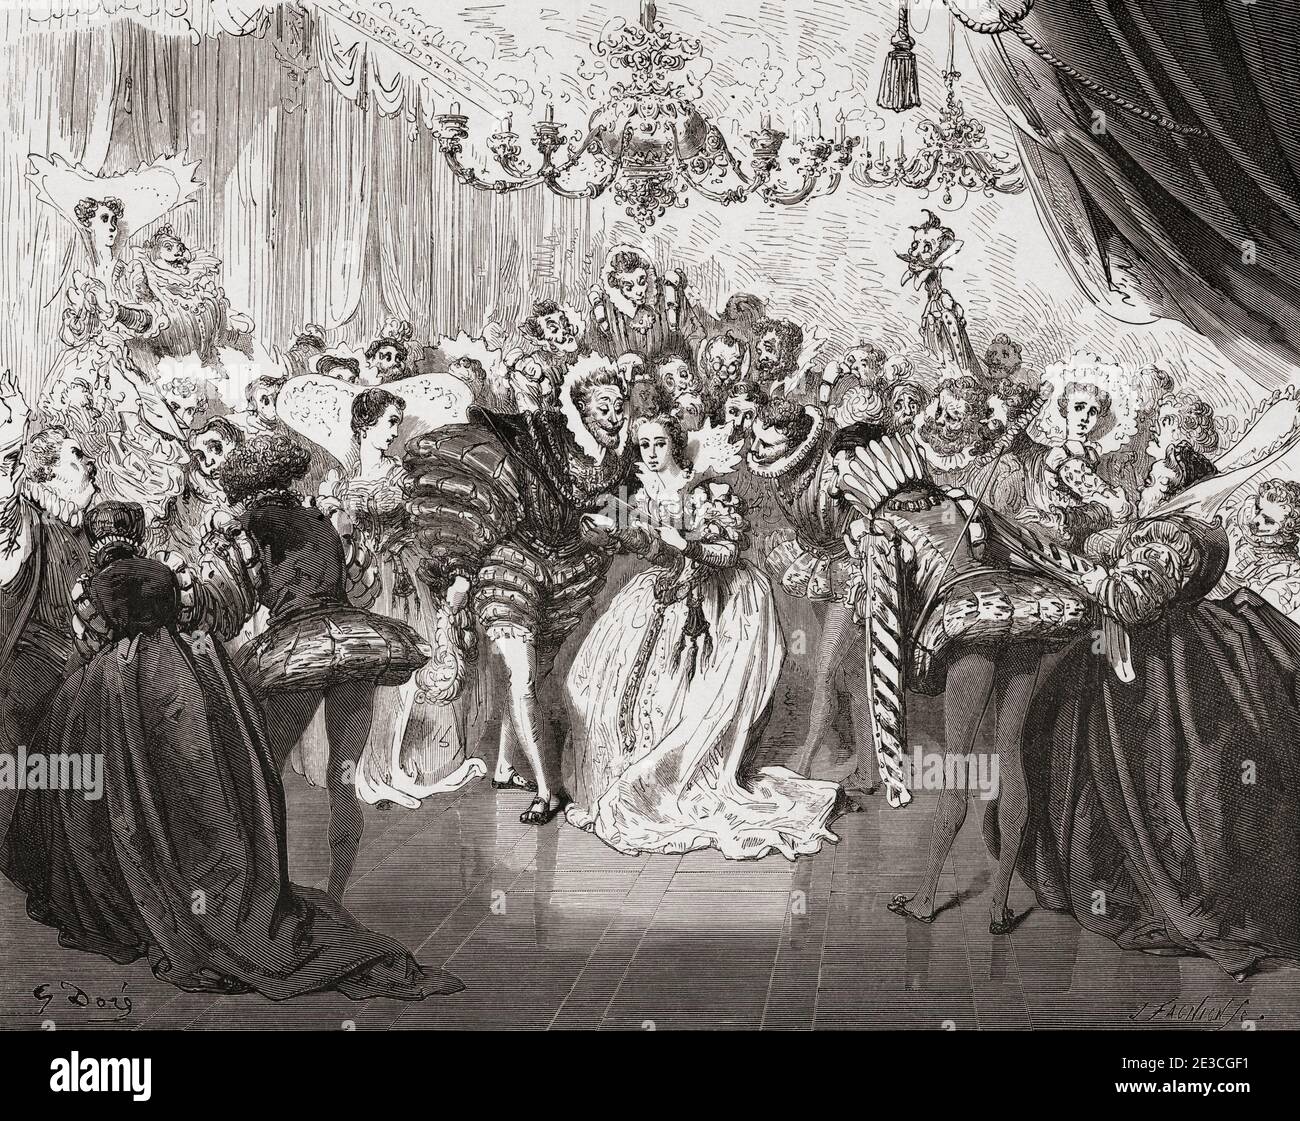 Cinderella at the Ball.  After a 19th century work by Gustave Dore. Stock Photo